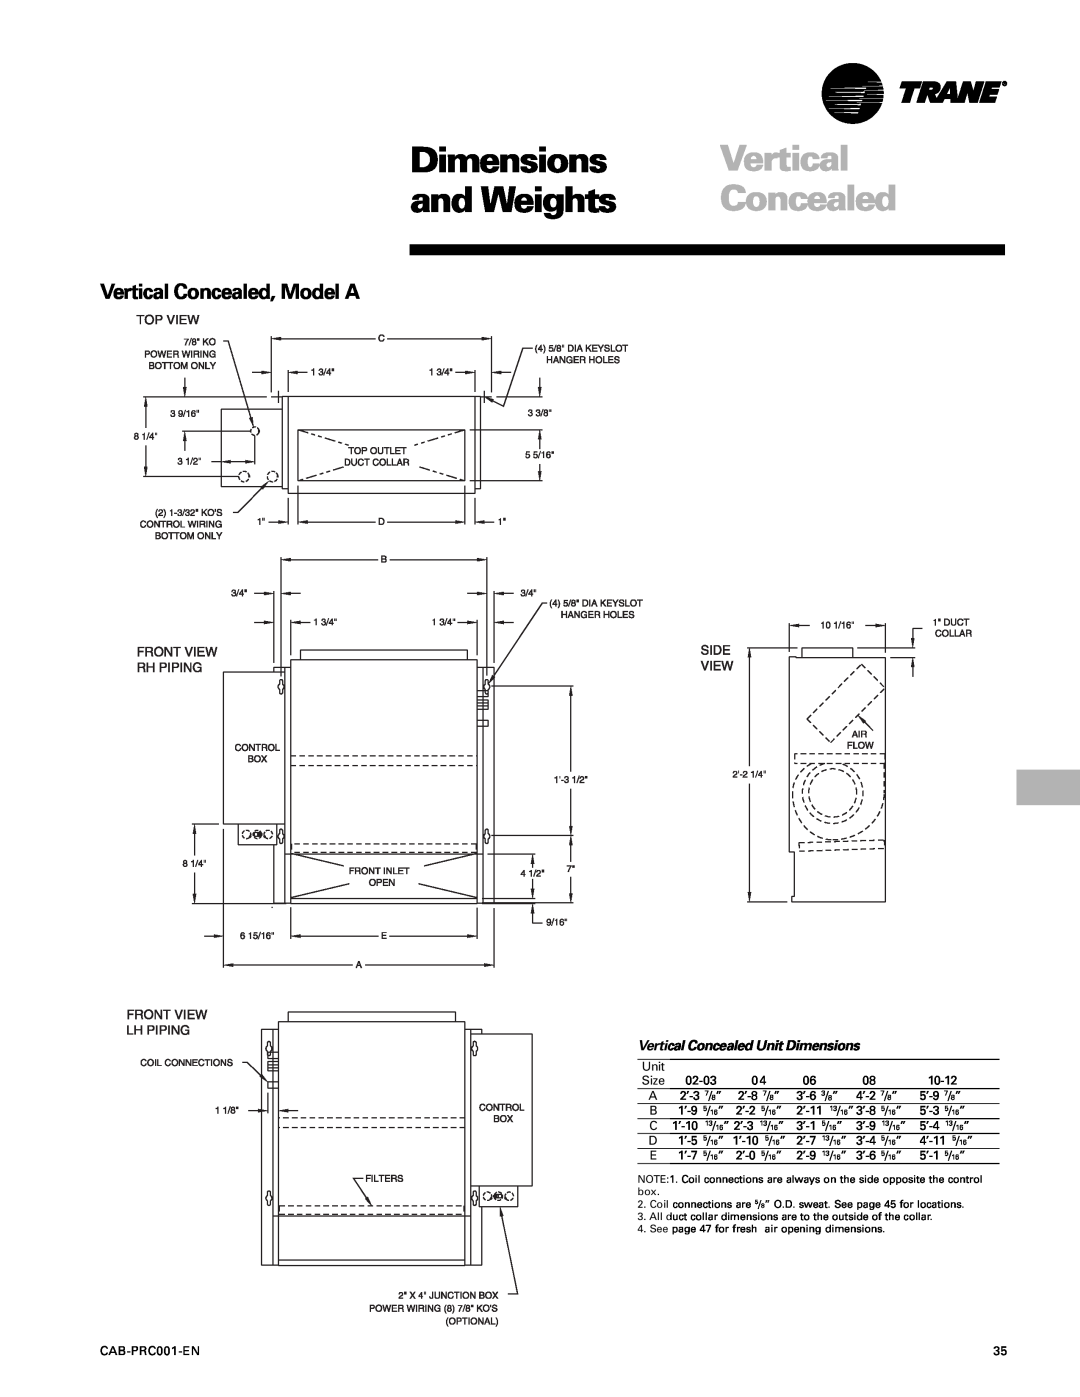 Trane CAB-PRC001-EN manual Dimensions, and Weights, Vertical Concealed, Model A 